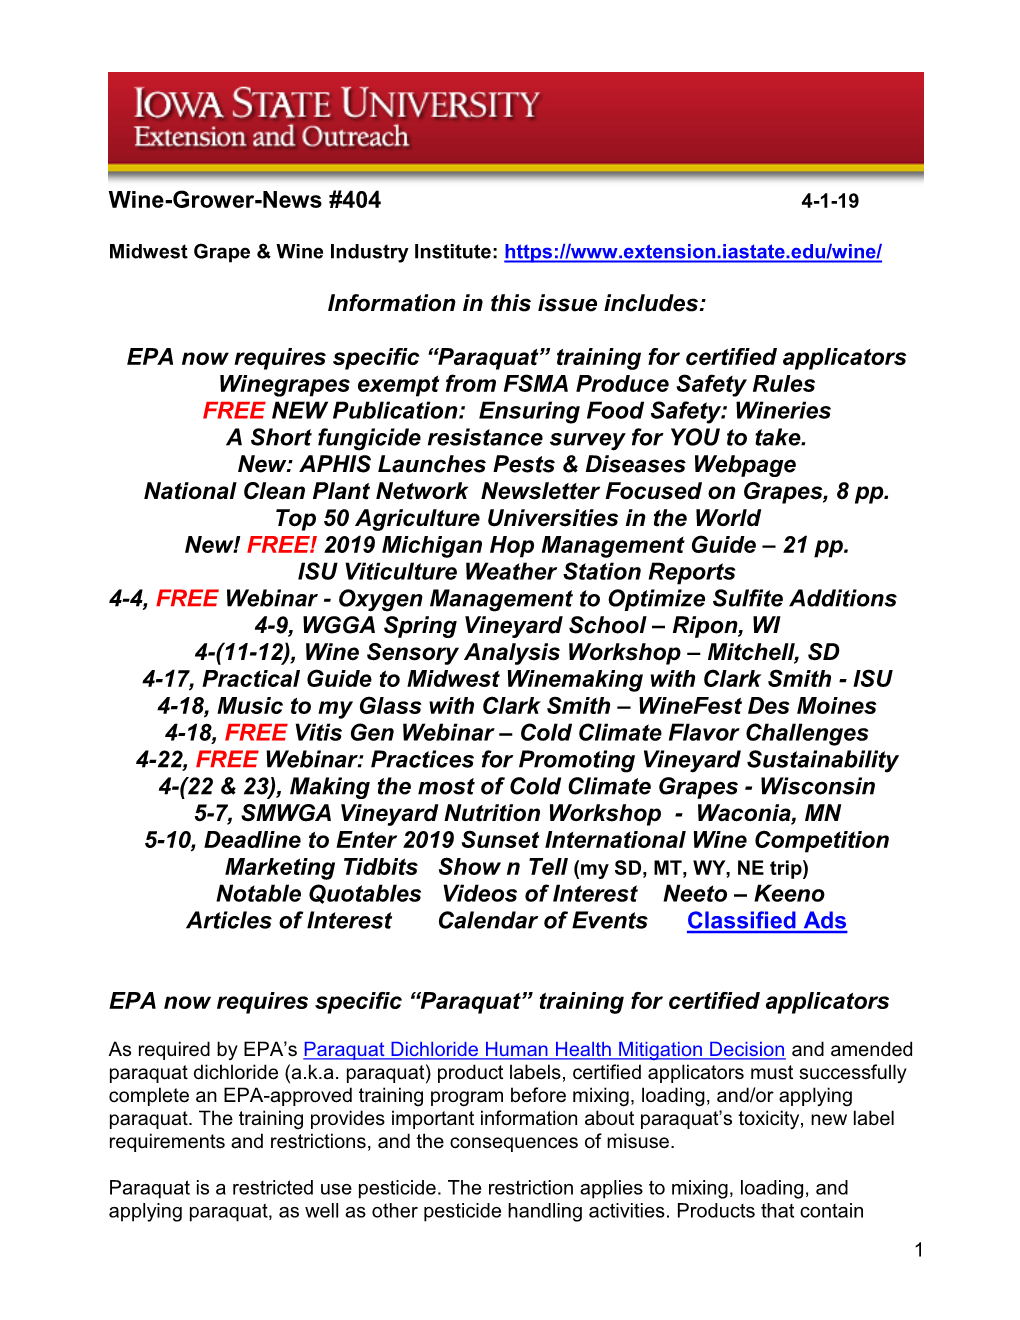 Wine-Grower-News #404 Information in This Issue Includes: EPA Now Requires Specific “Paraquat” Training for Certified Ap